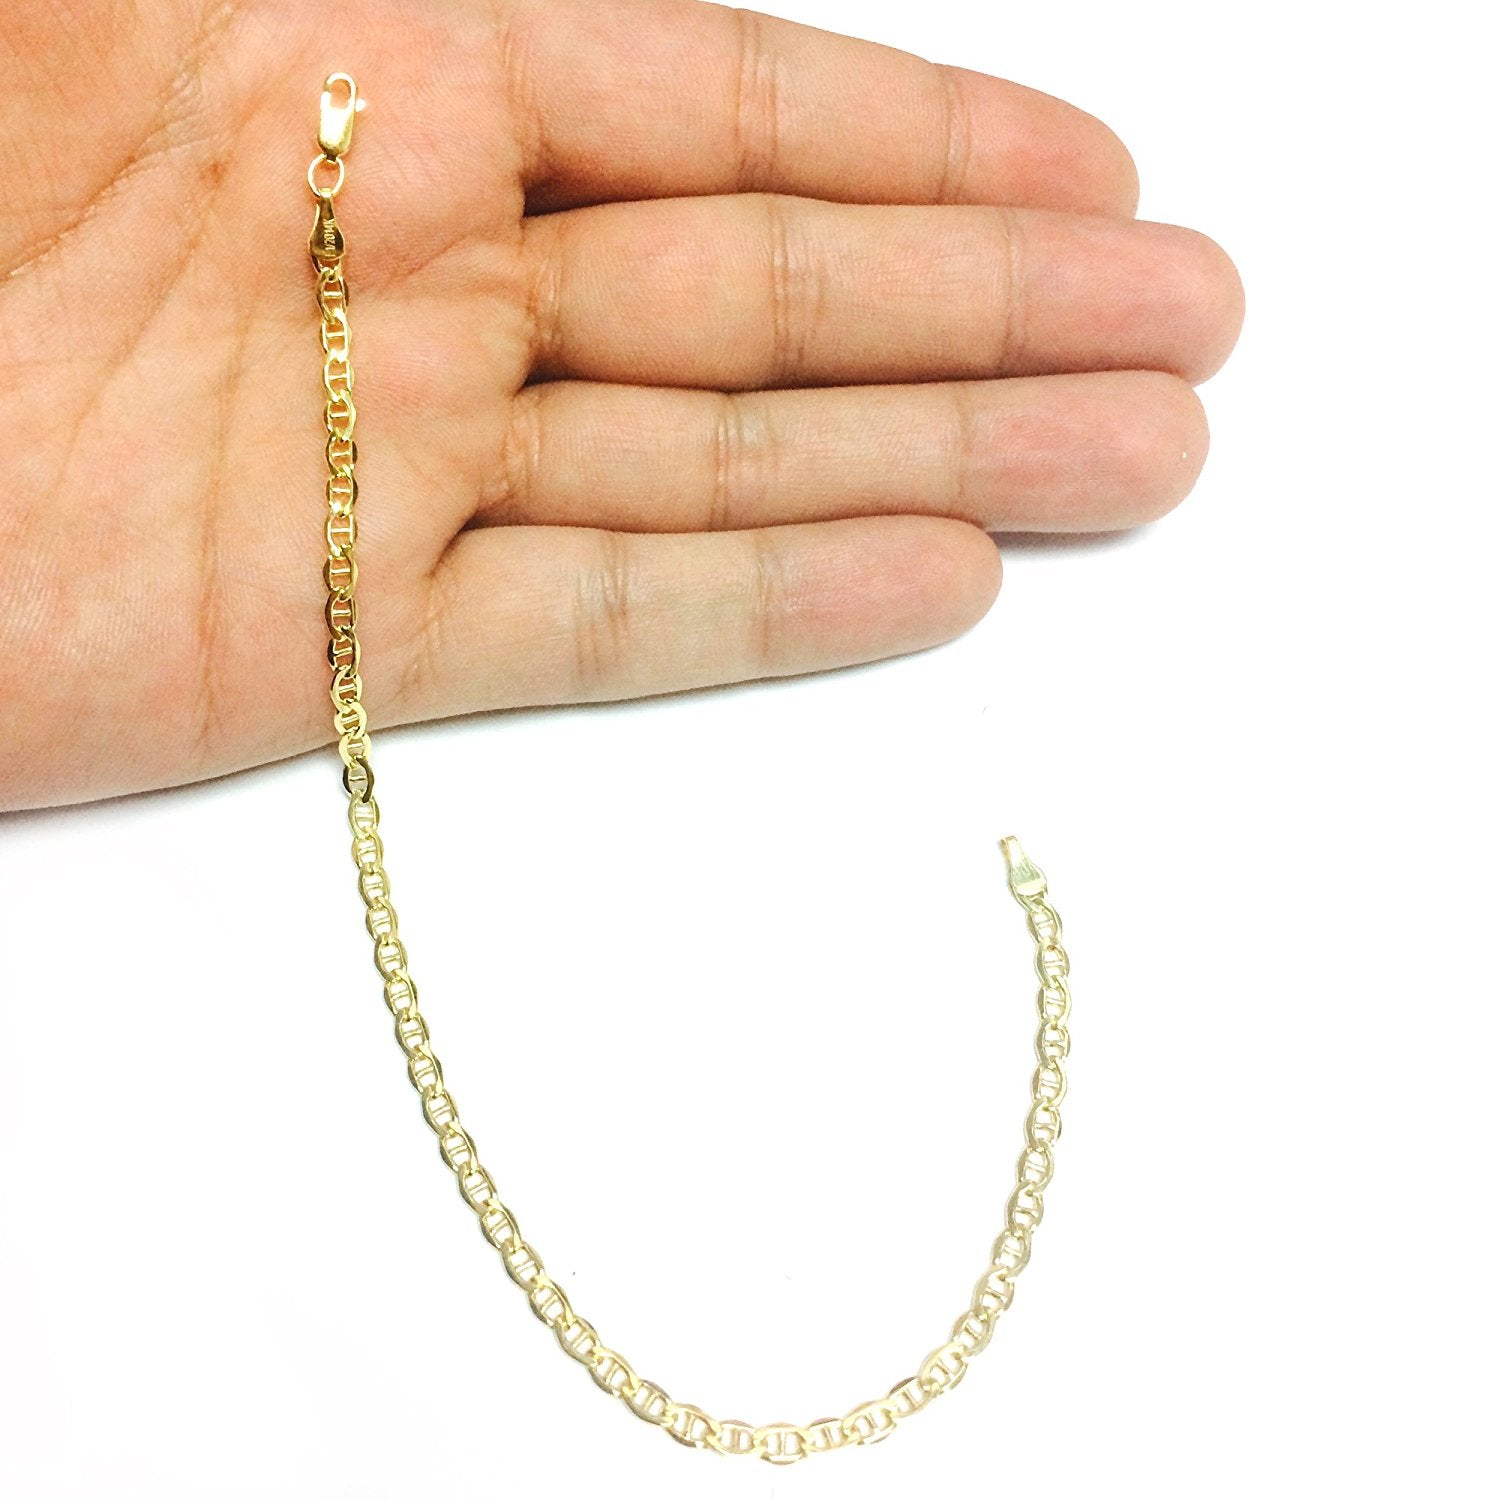 14K Yellow Gold Filled Solid Mariner Chain Bracelet, 3.2mm, 8.5" fine designer jewelry for men and women